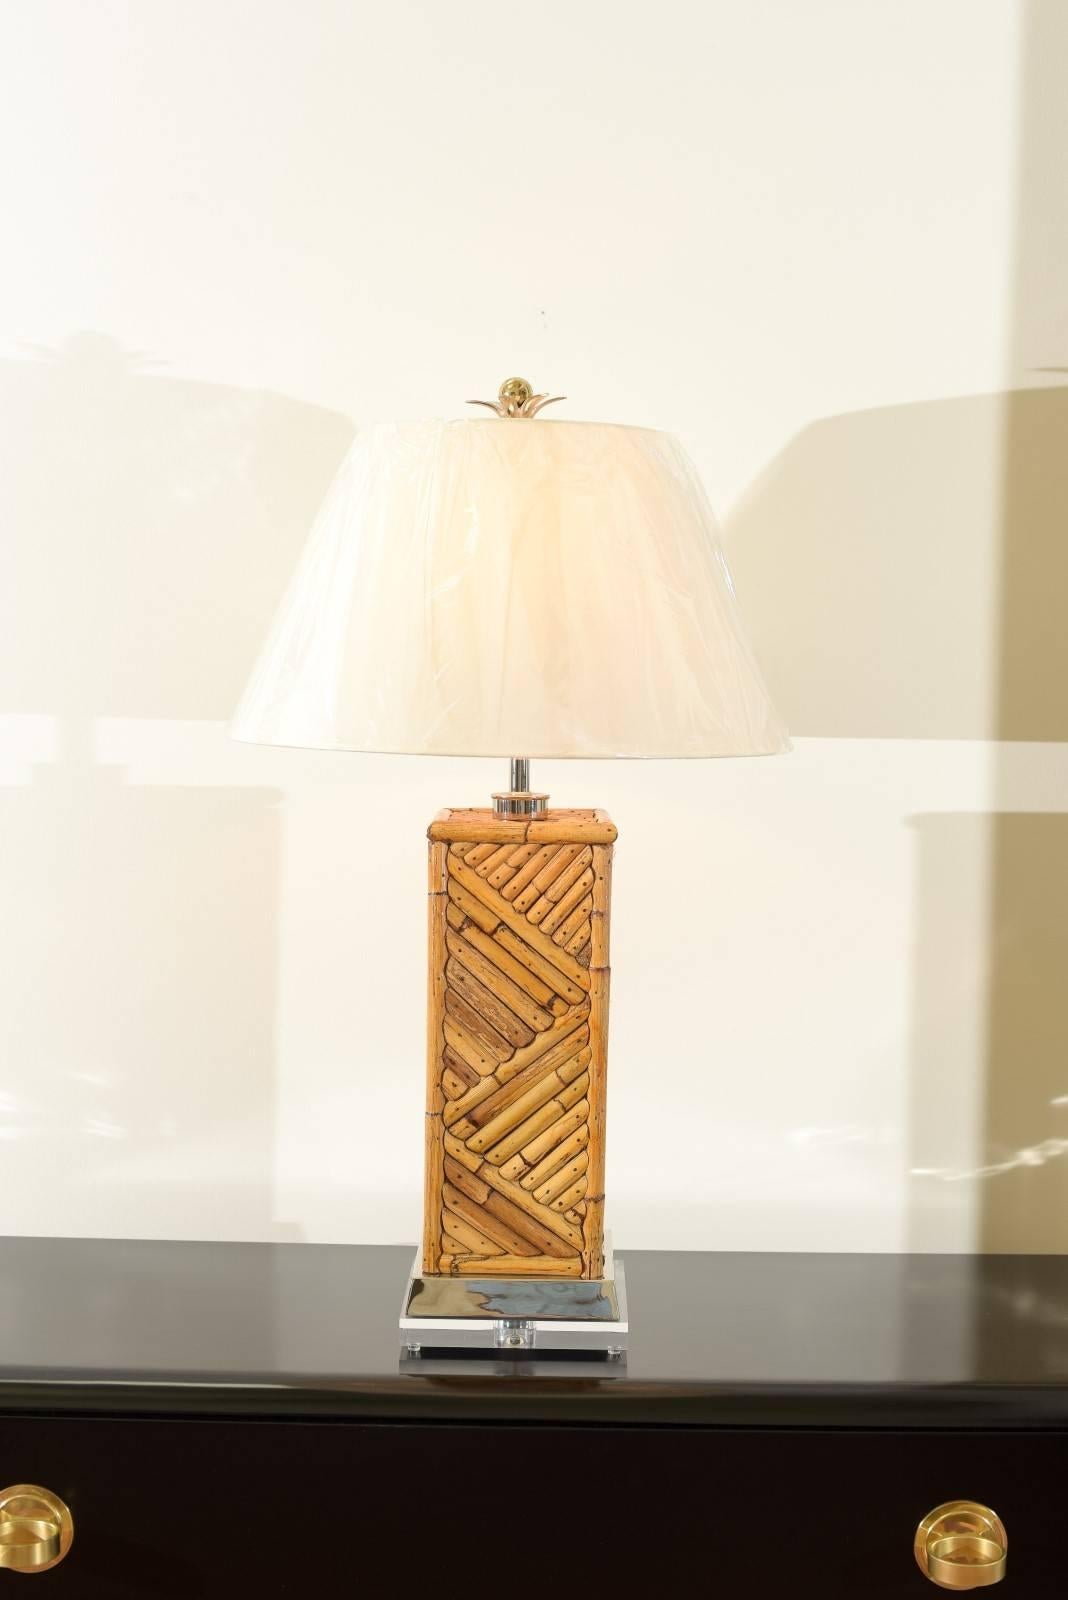 These magnificent lamps are shipped as photographed and described in the narrative. They are professionally restored using materials of the highest quality and are shipped complete with the new shades, harps and finials shown in the photos.

A